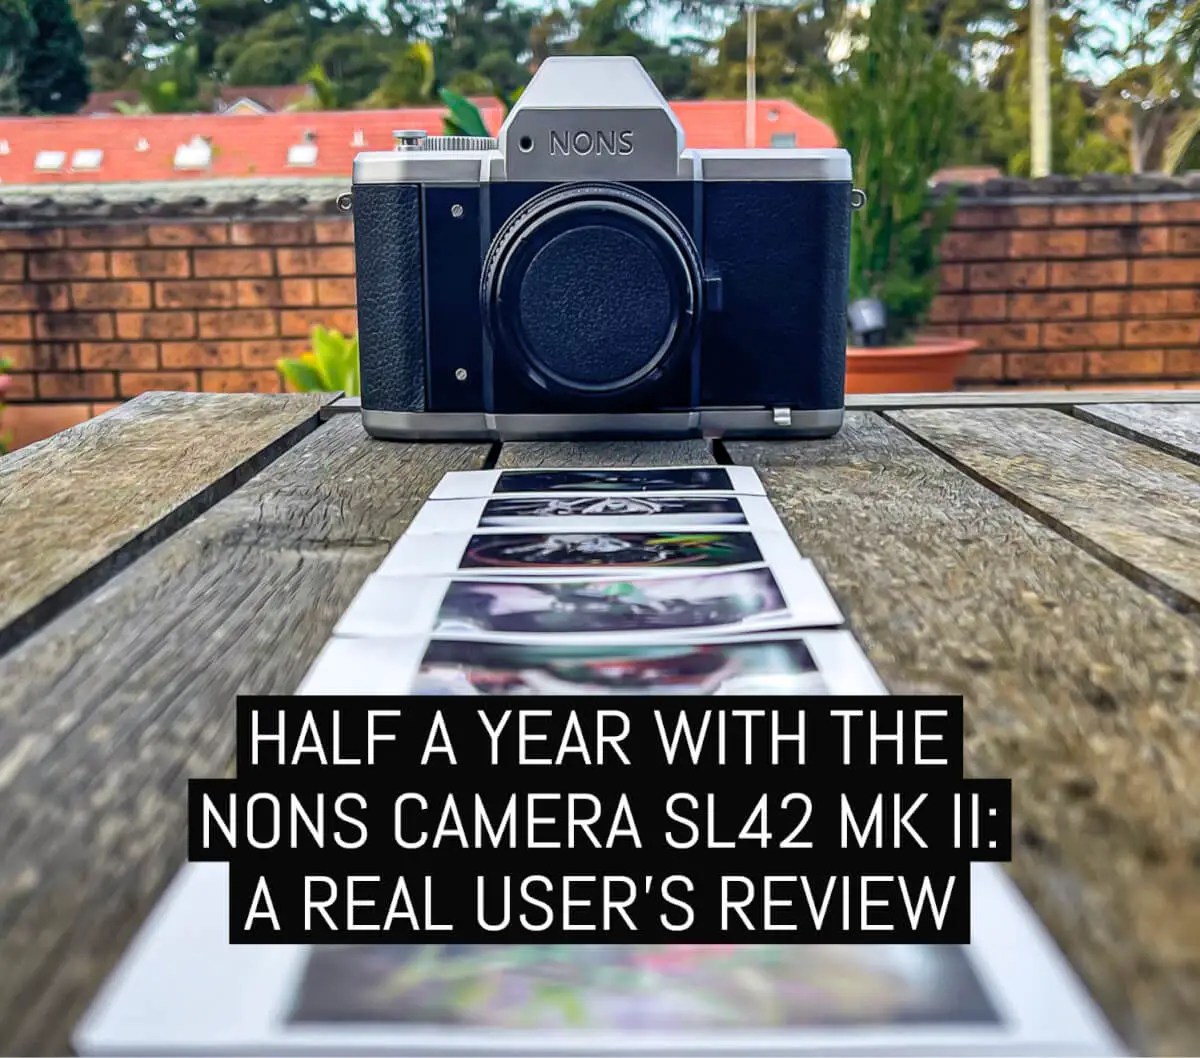 Half a year with the Nons Camera SL42 Mk II, a real user's review